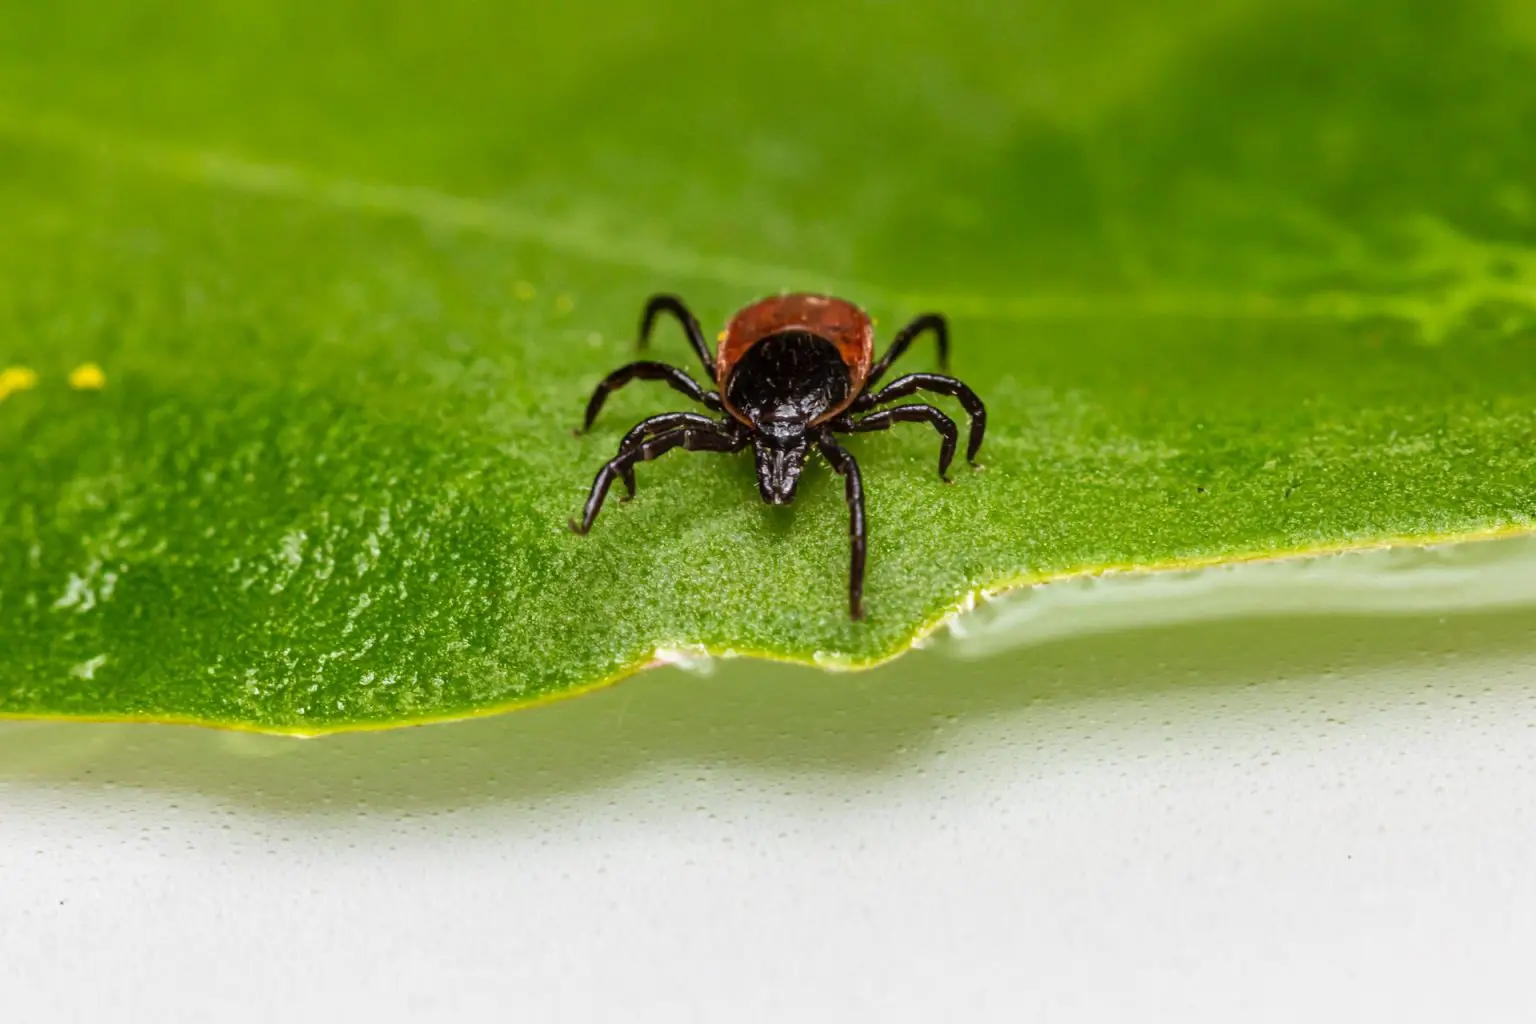 How to Keep Ticks Off My Dog? Here’s a Quick Guide